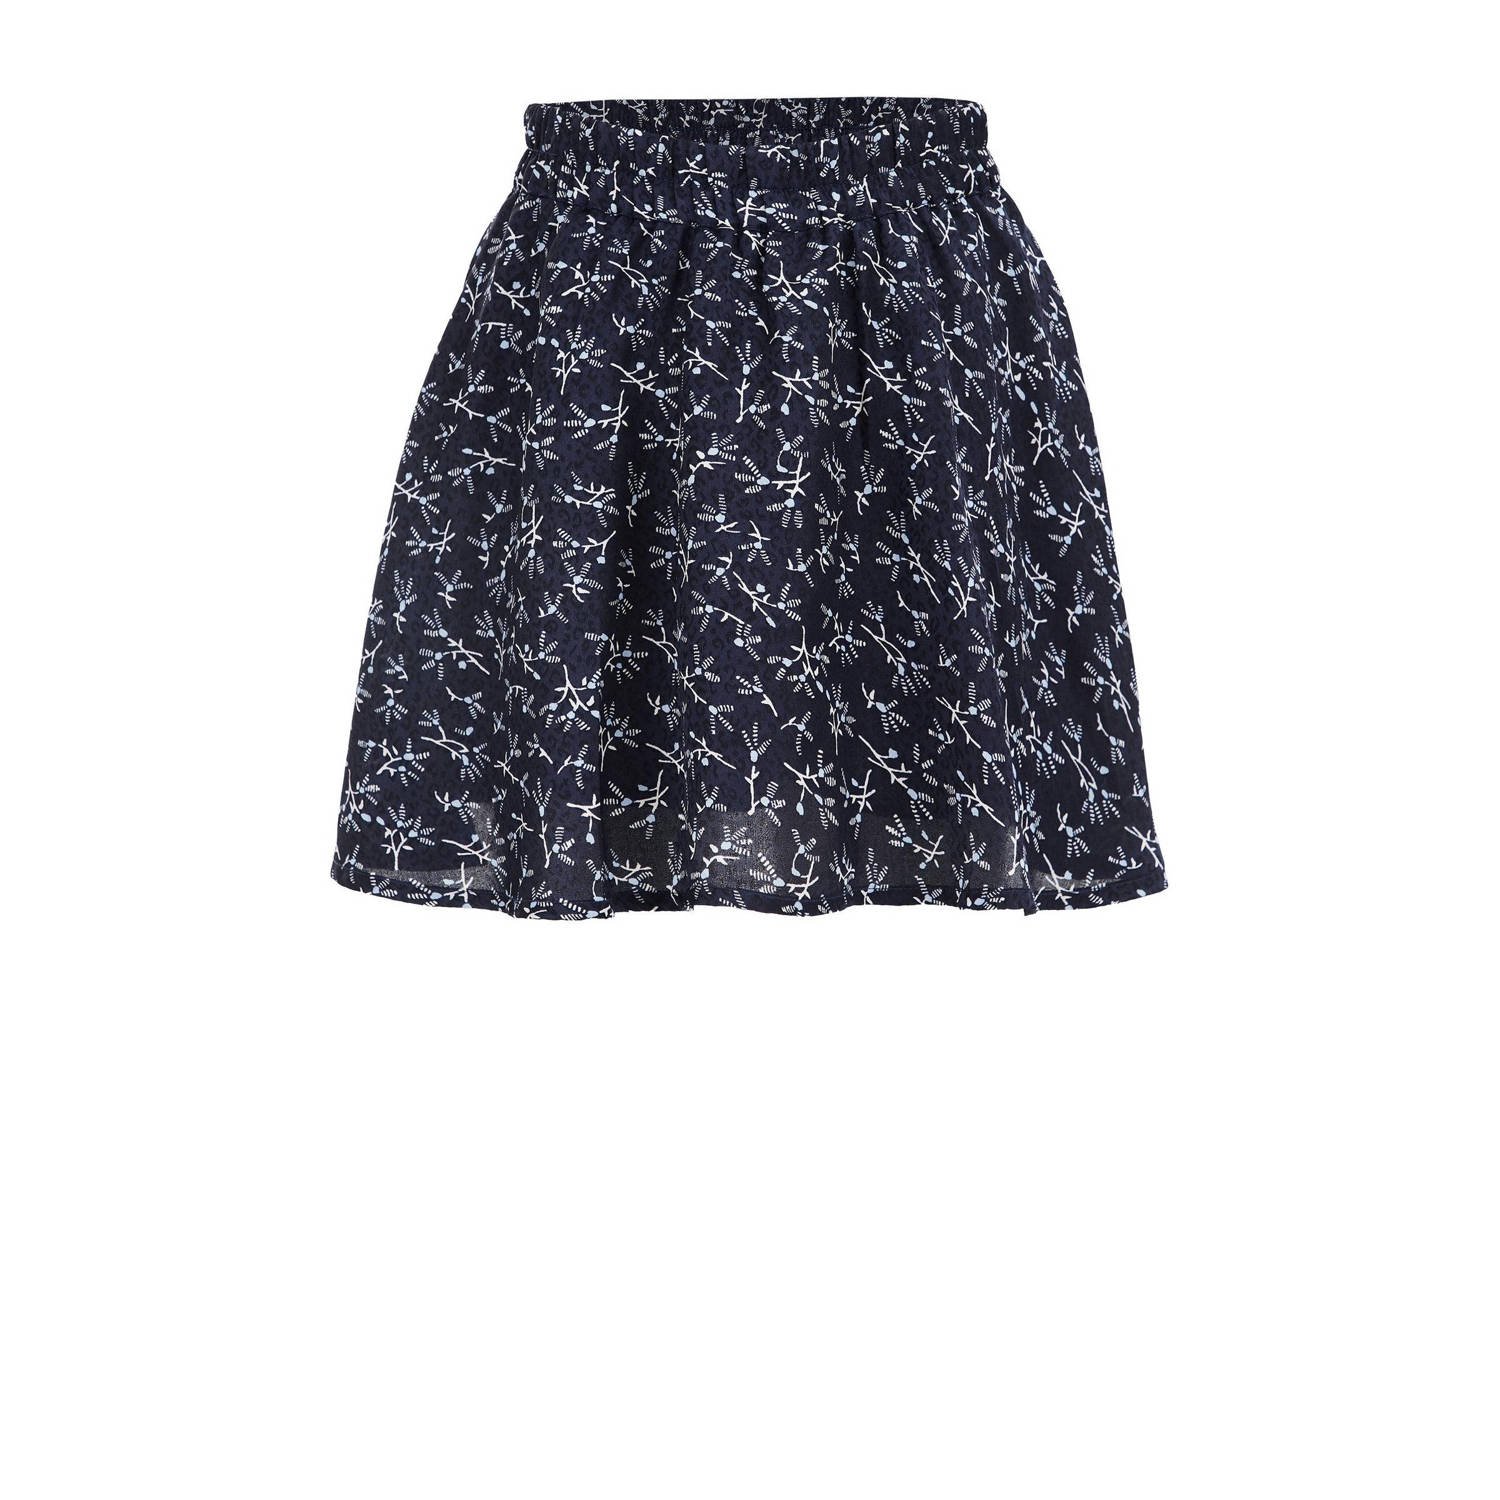 WE Fashion skort met all over print donkerblauw Rok Meisjes Polyester All over print 110 116